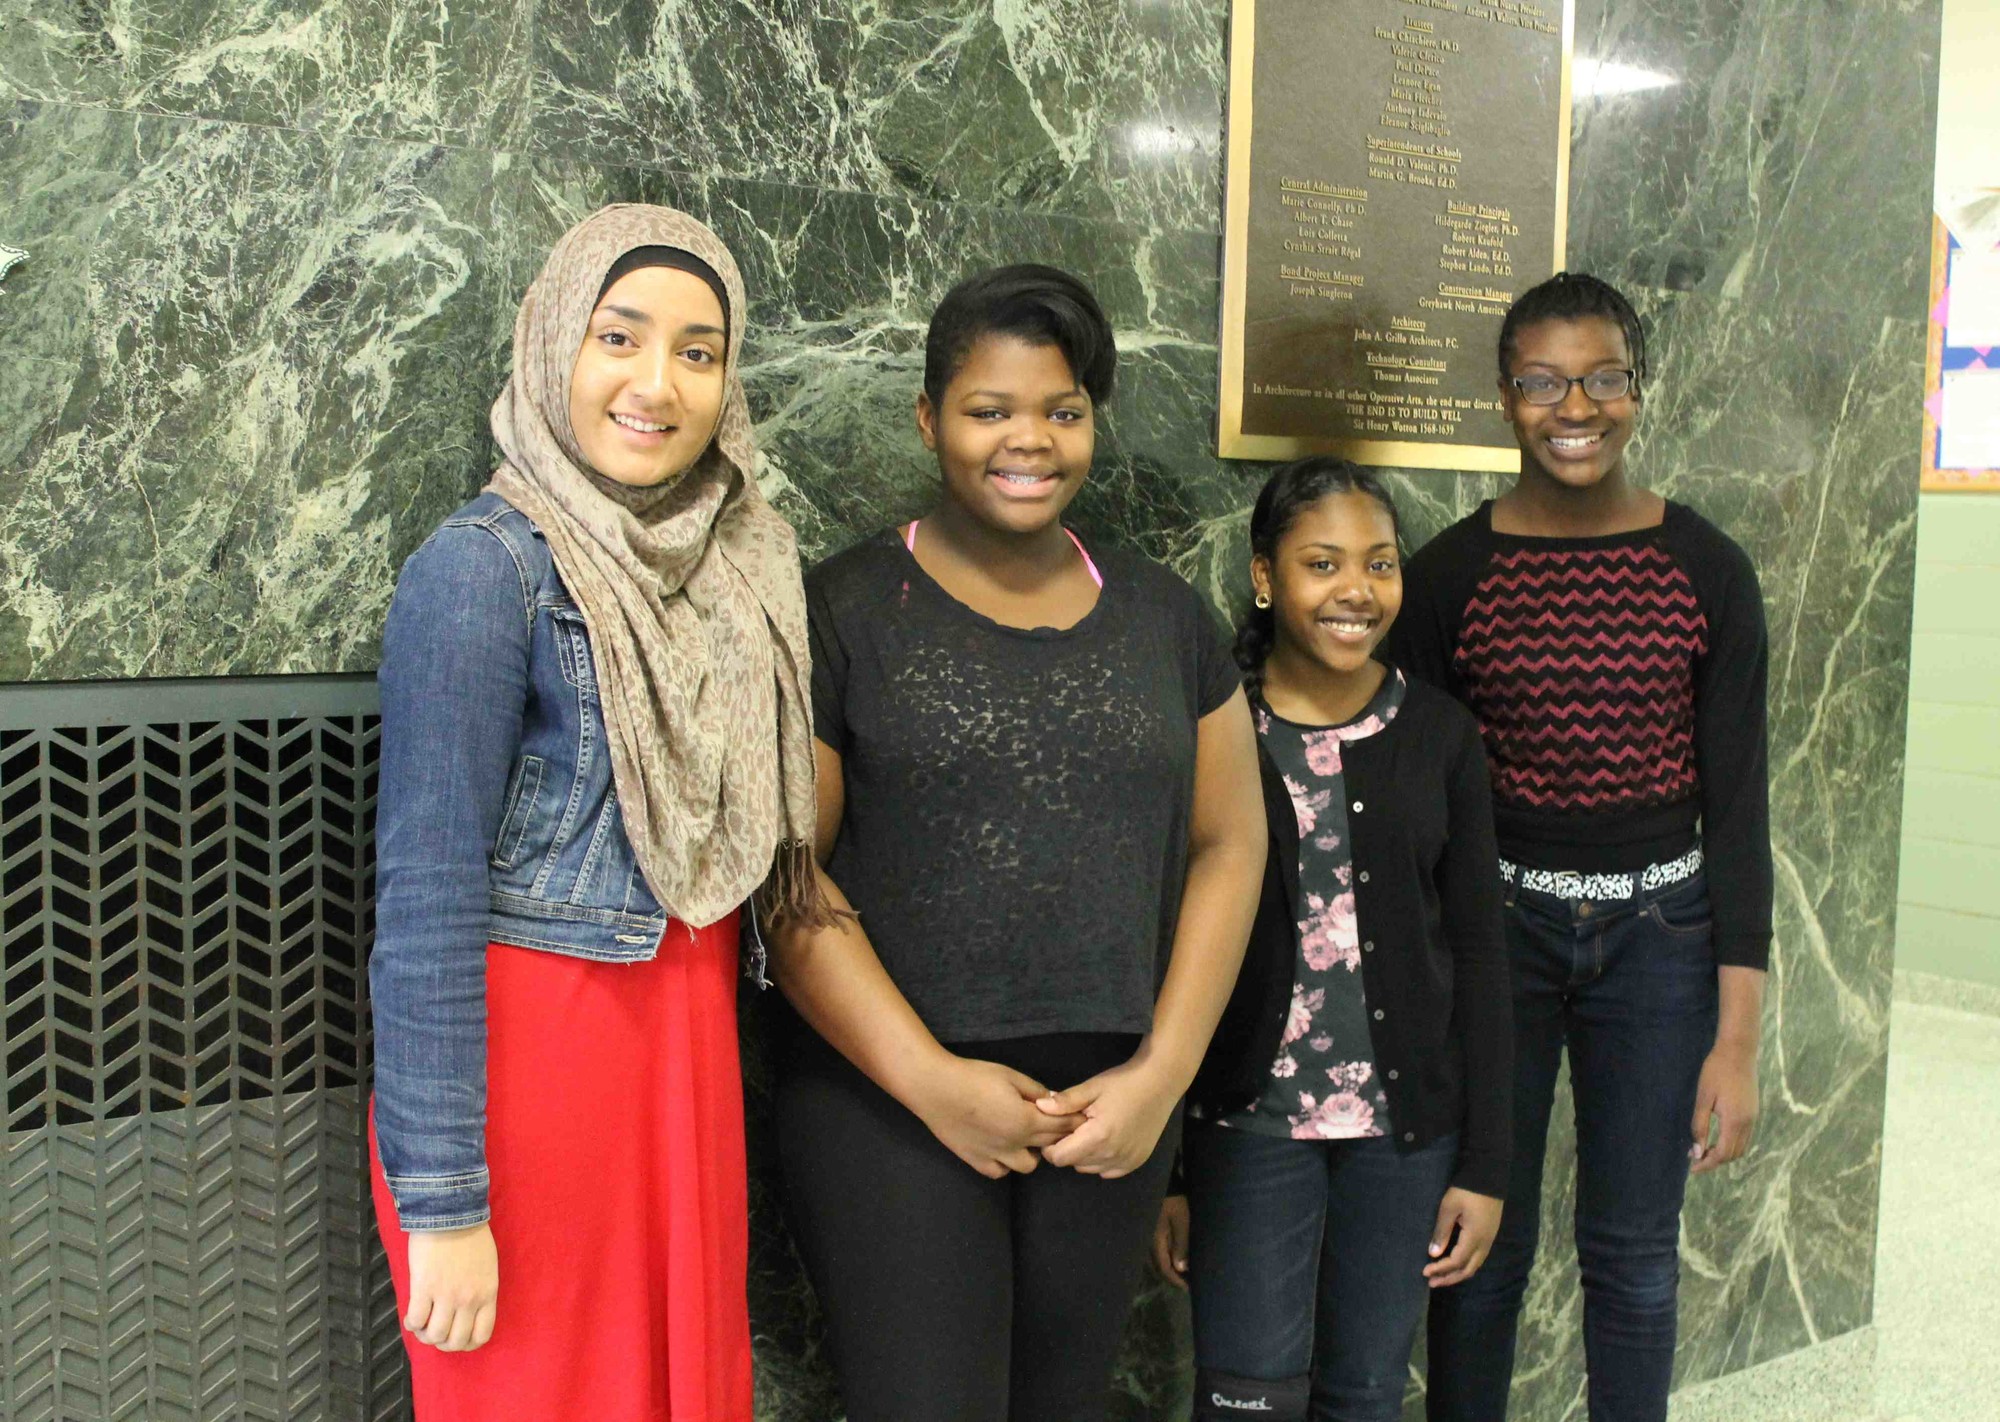 Eighth-graders Khadija Zahid and Alexandra Henrius and seventh-graders Ariana Smith and Jania Robinson won the school competitions for their grades.